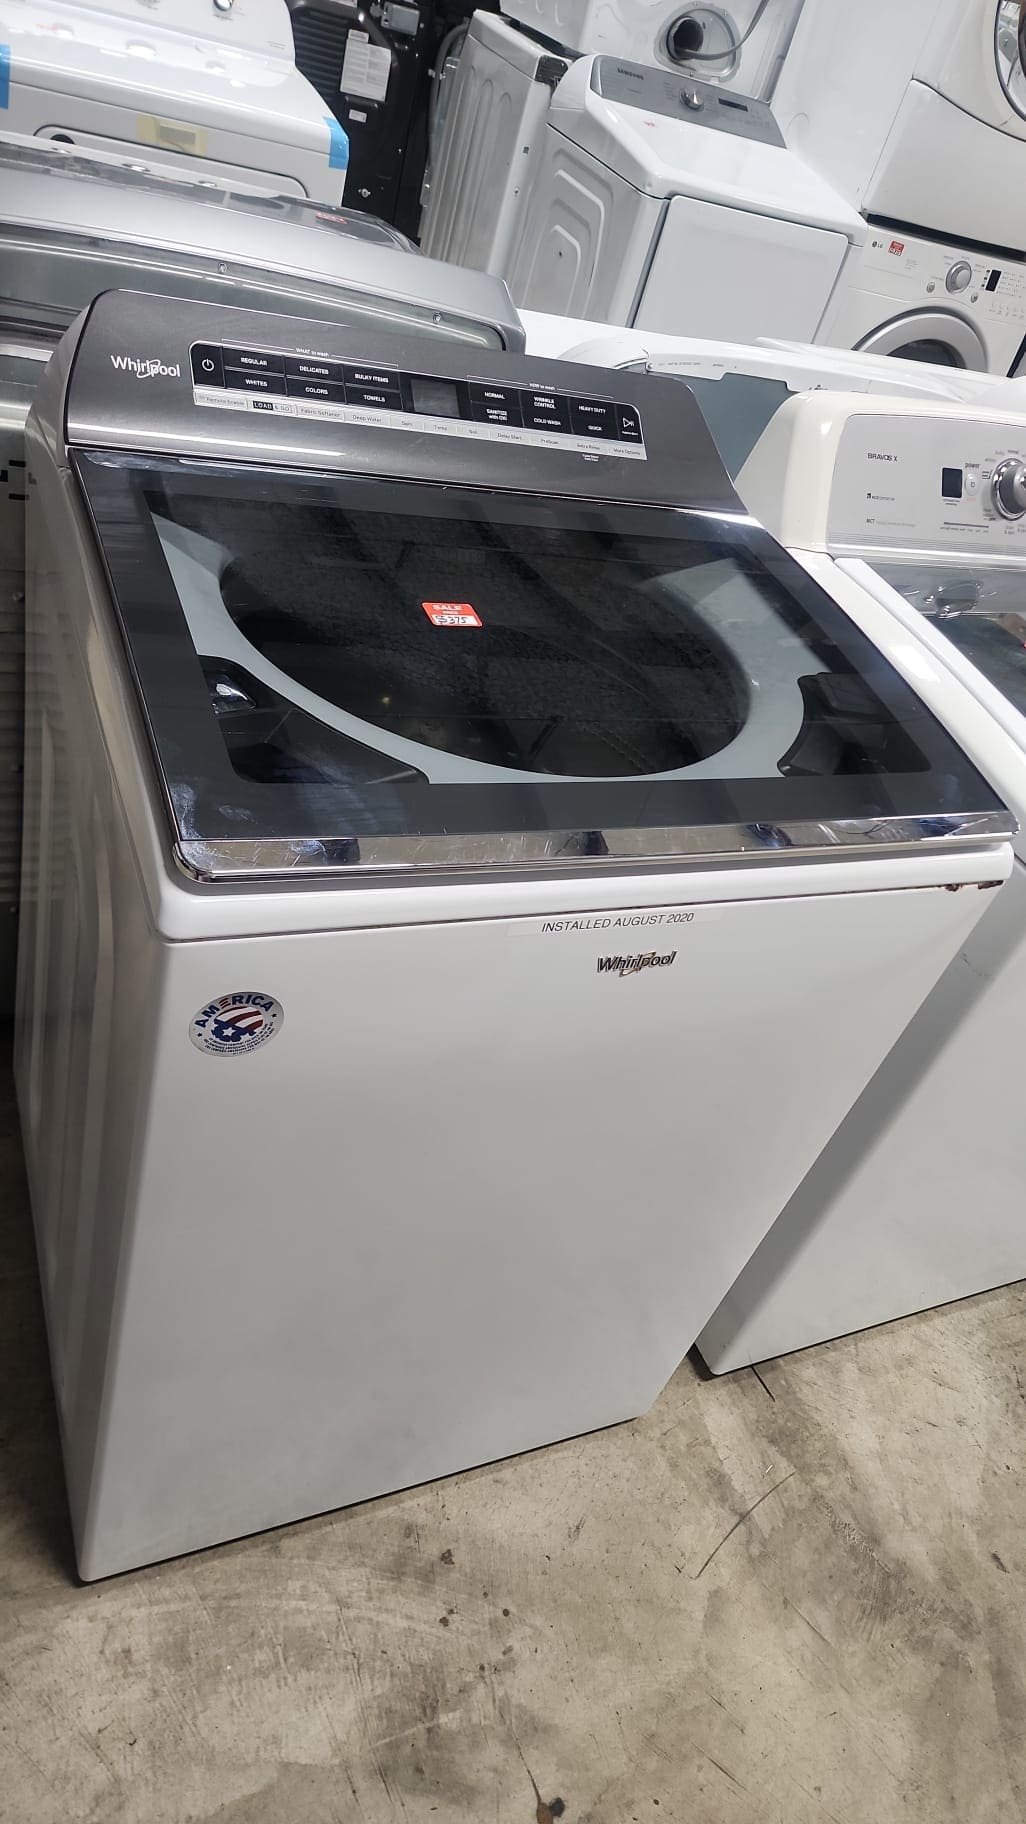 Whirlpool Used Top Load Washer – White & Black